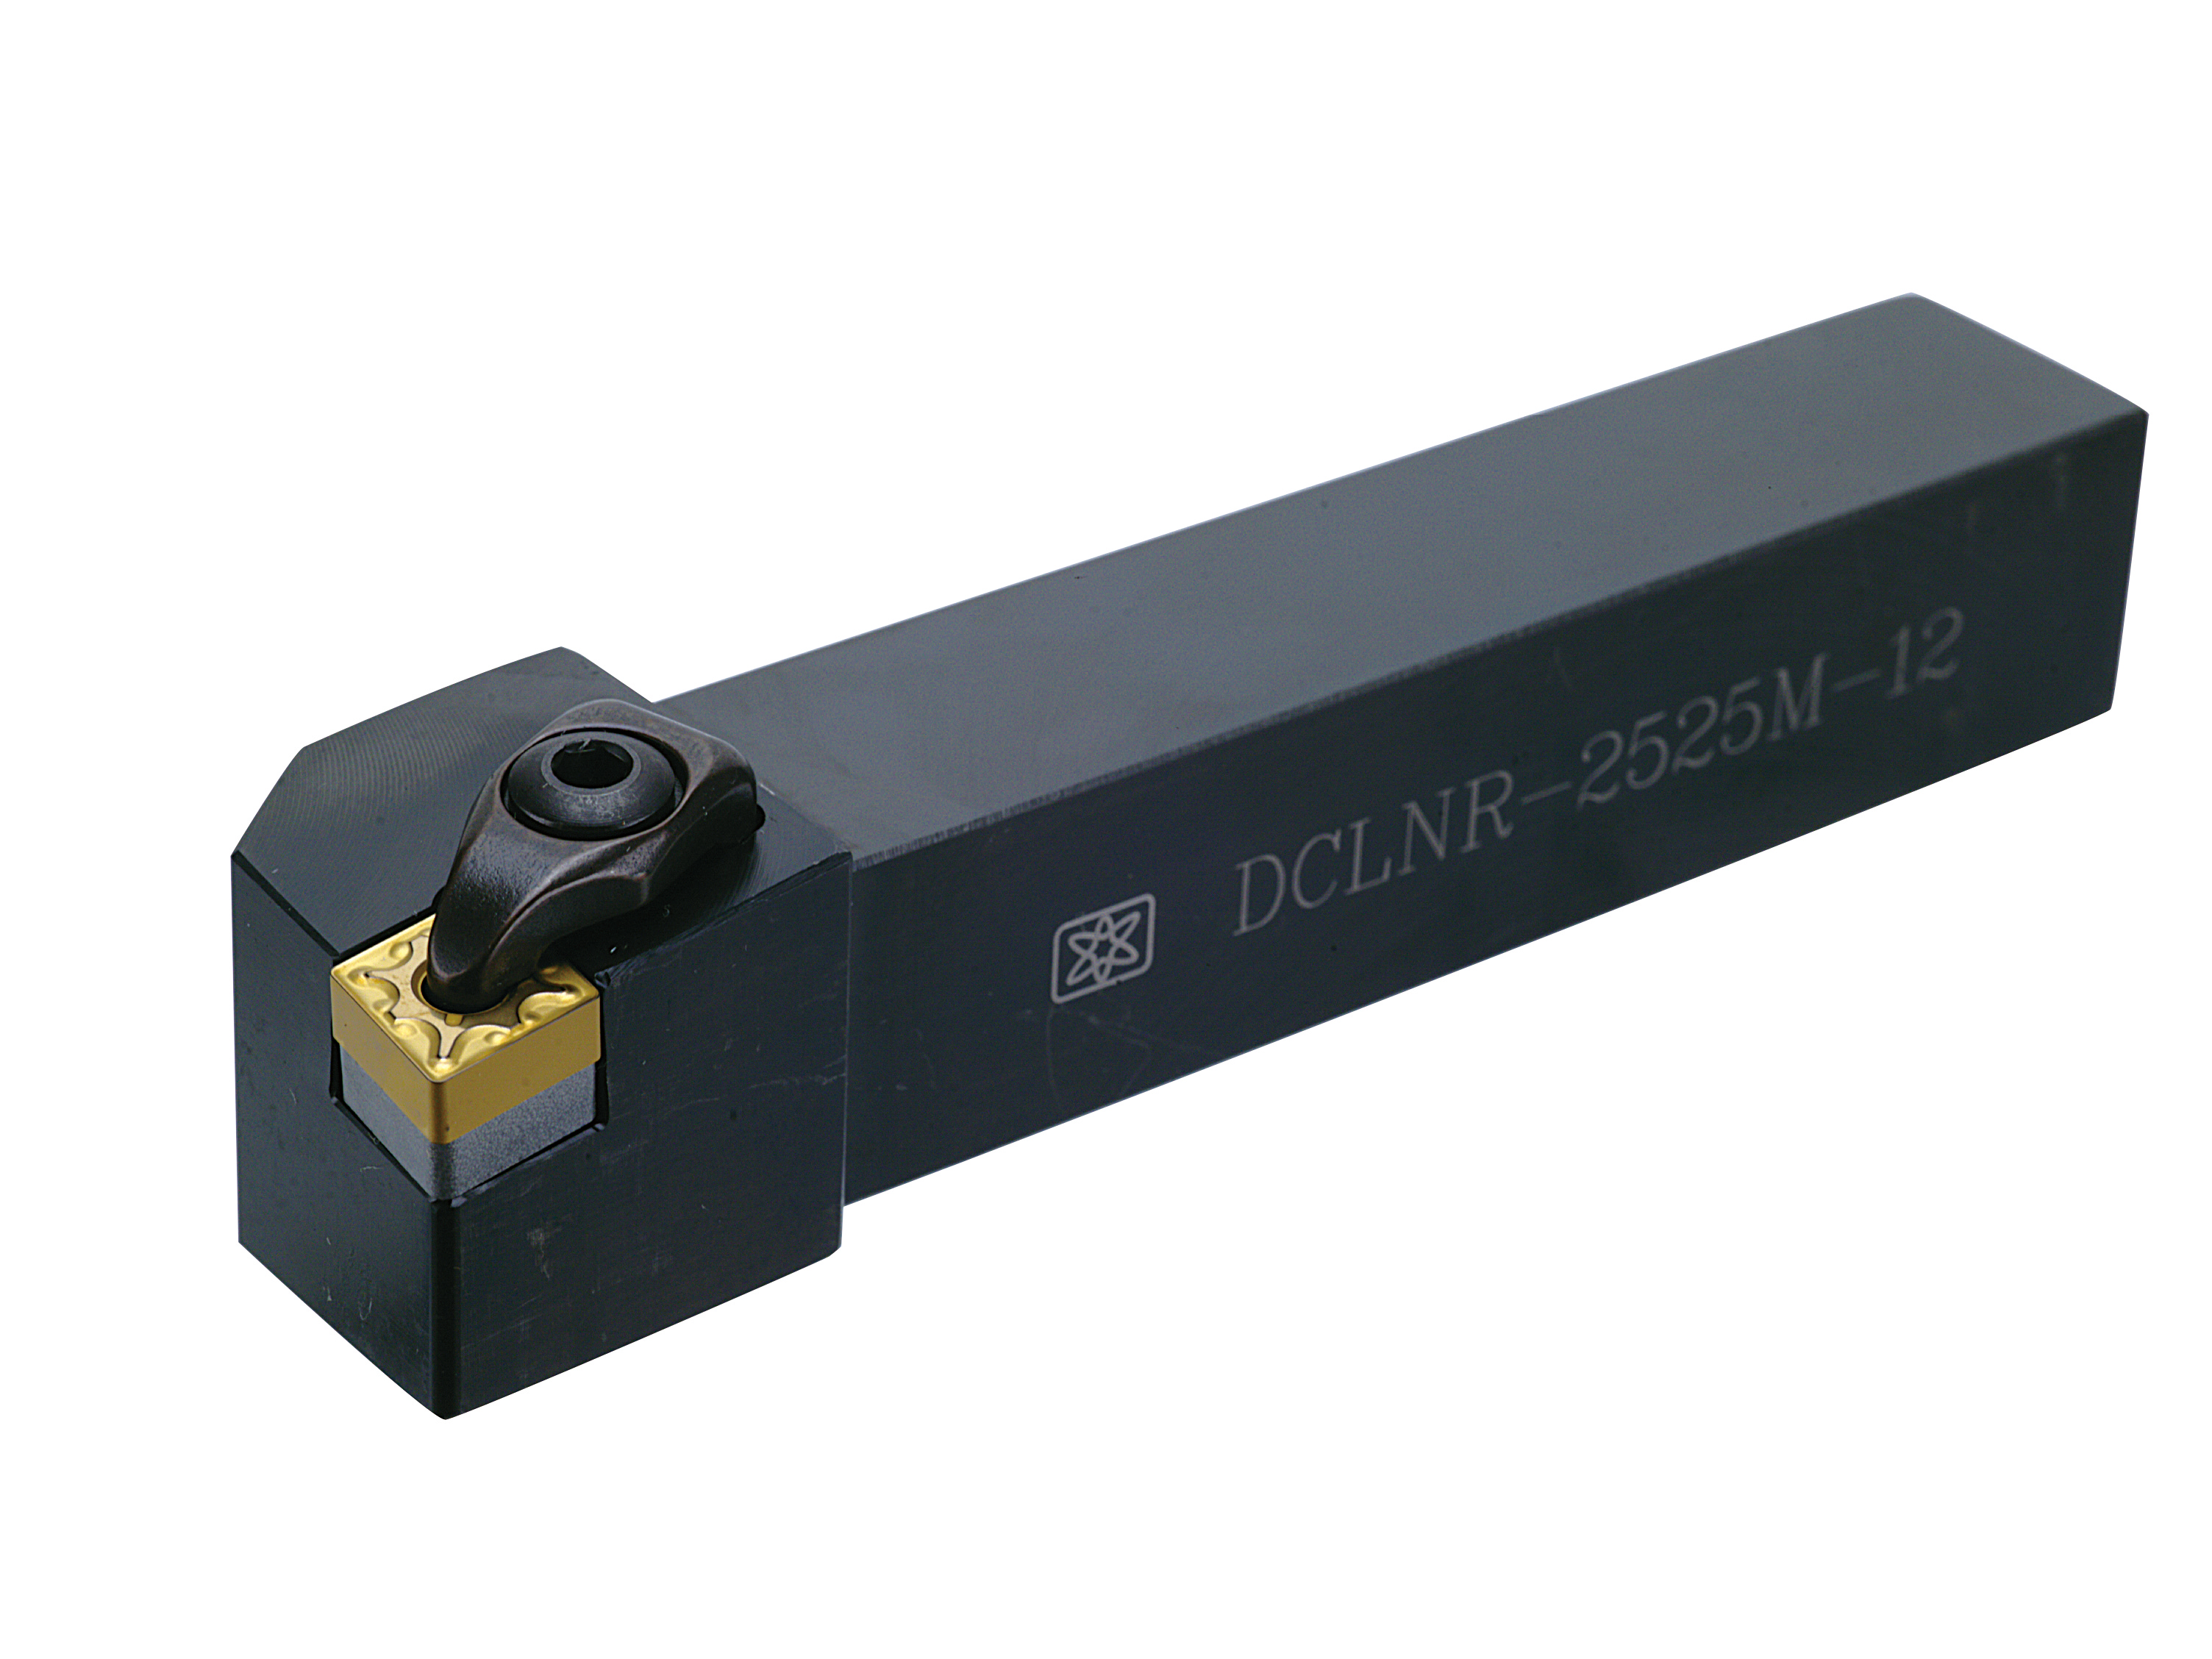 Products|DCLNR (CNMG1204) External Turning Tool